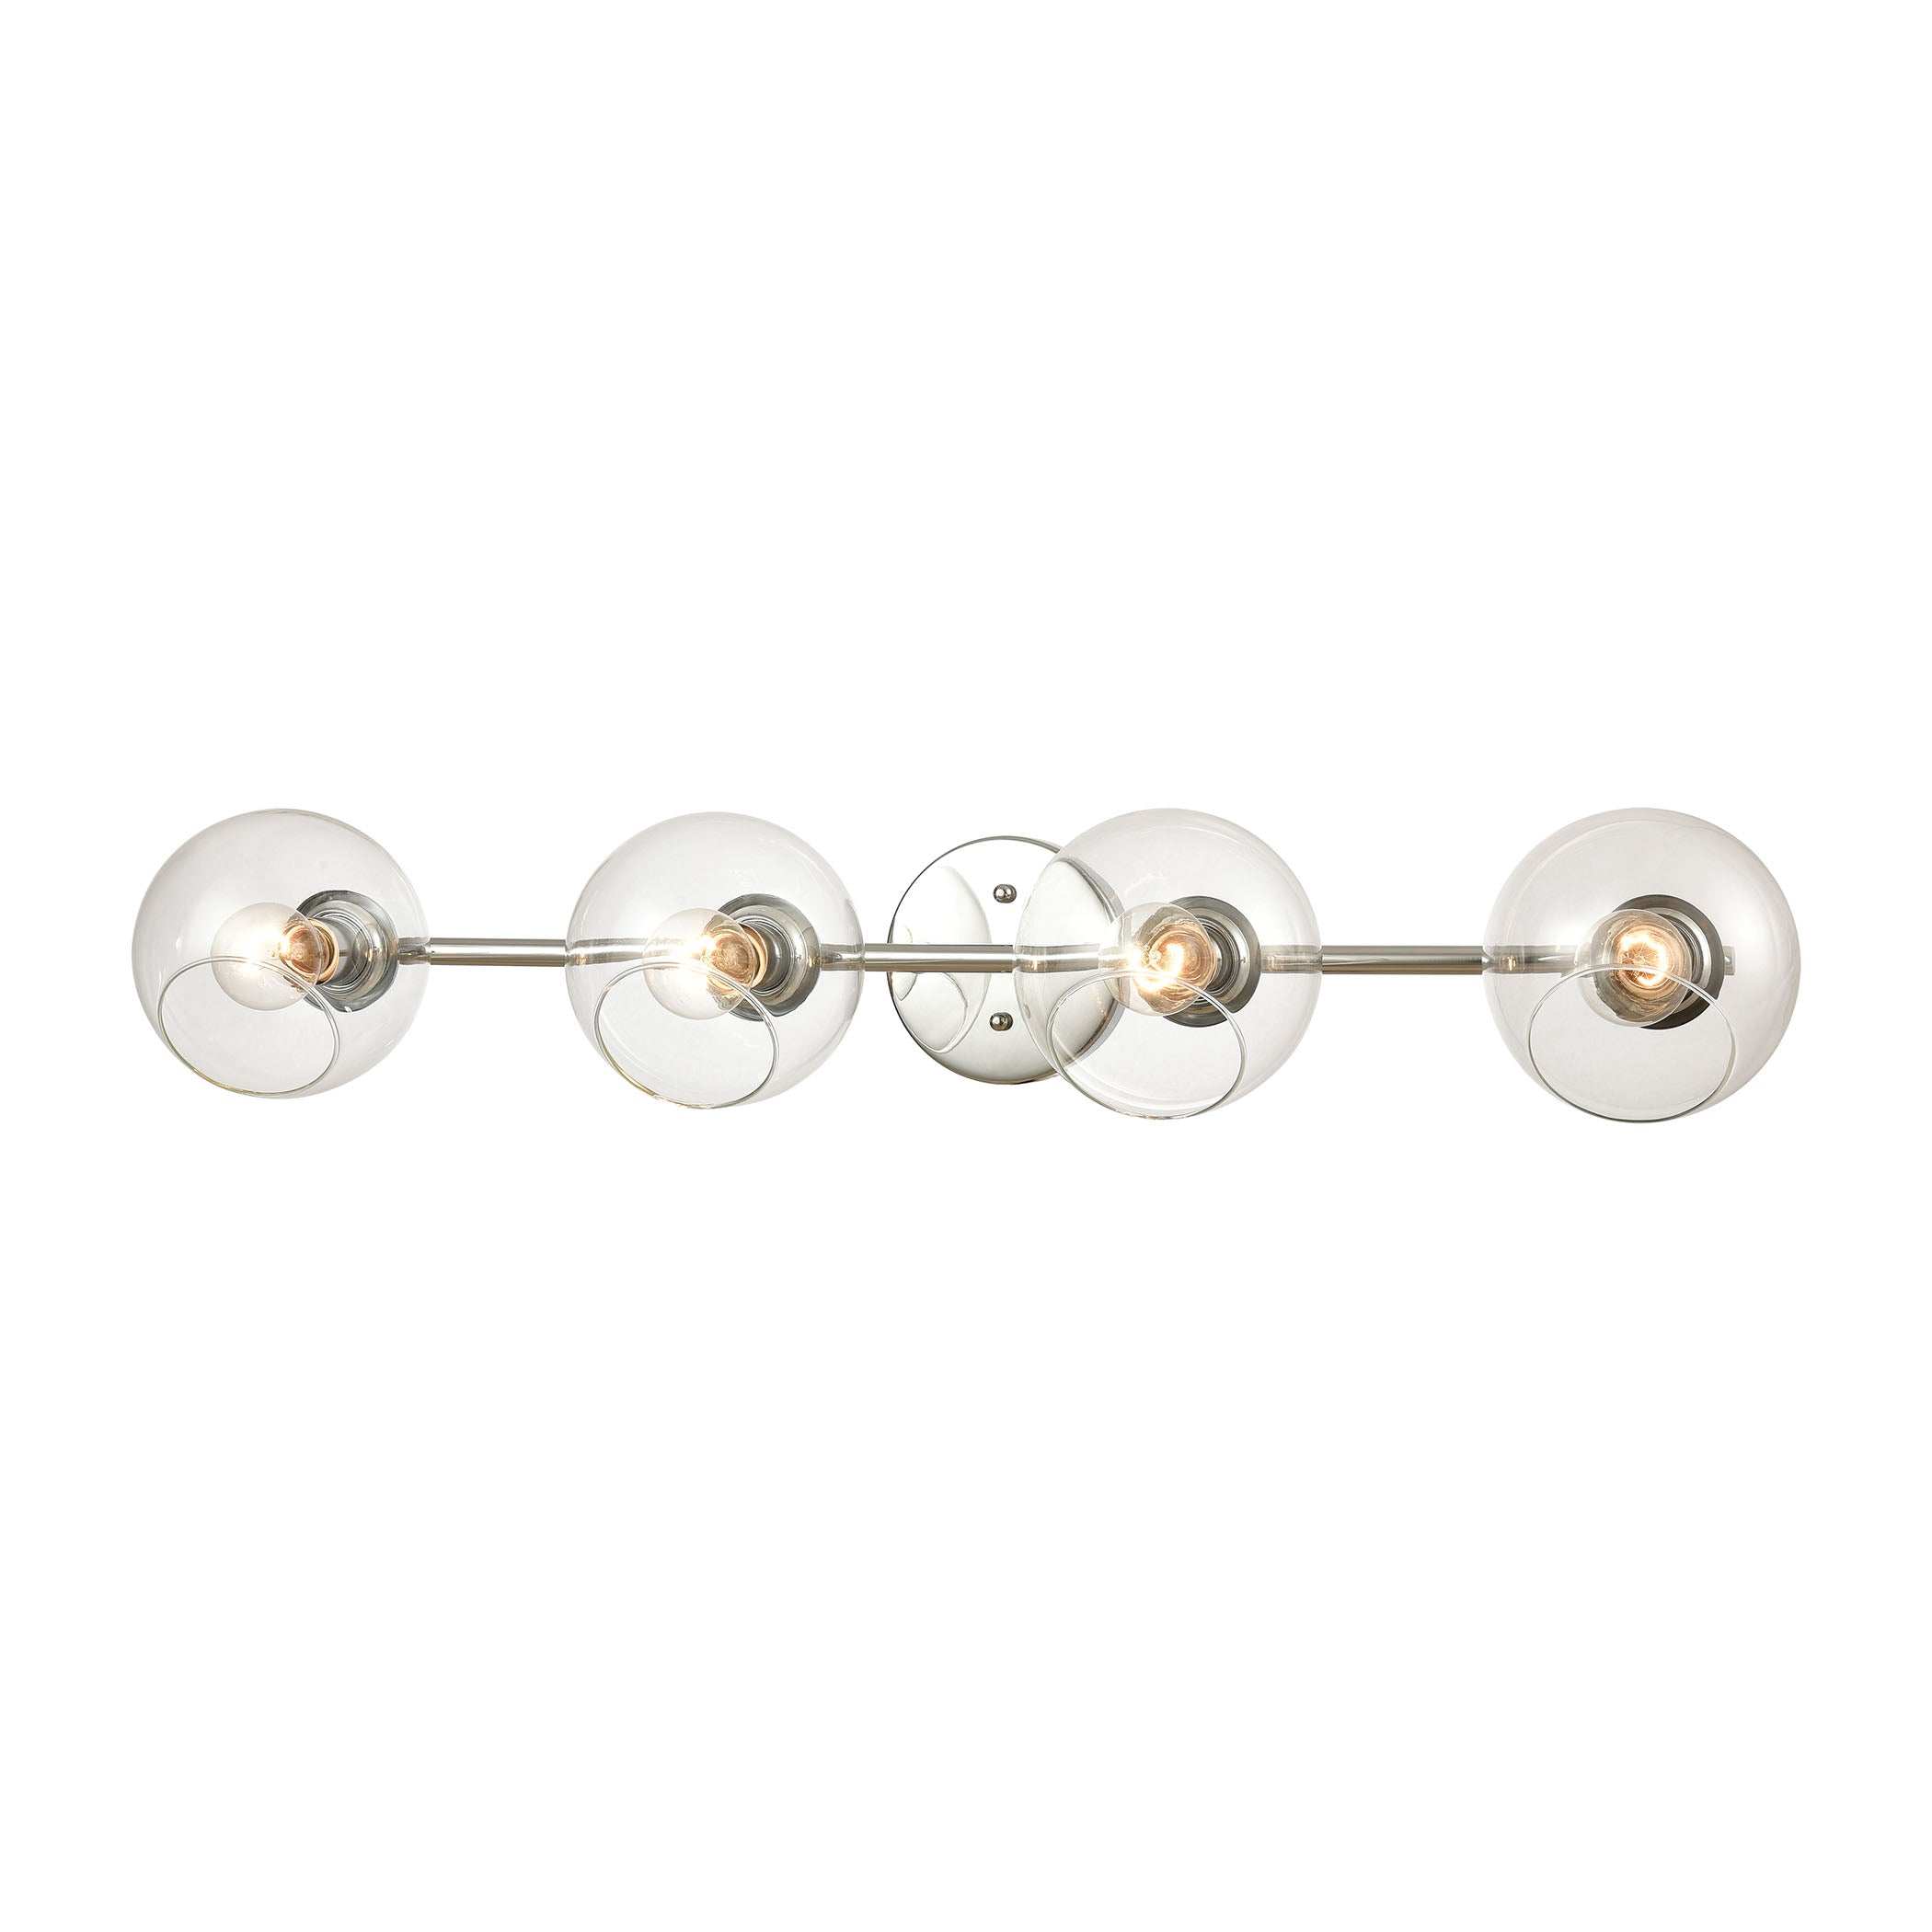 ELK Lighting 18376/4 Claro 4-Light Vanity Light in Polished Chrome with Clear Glass